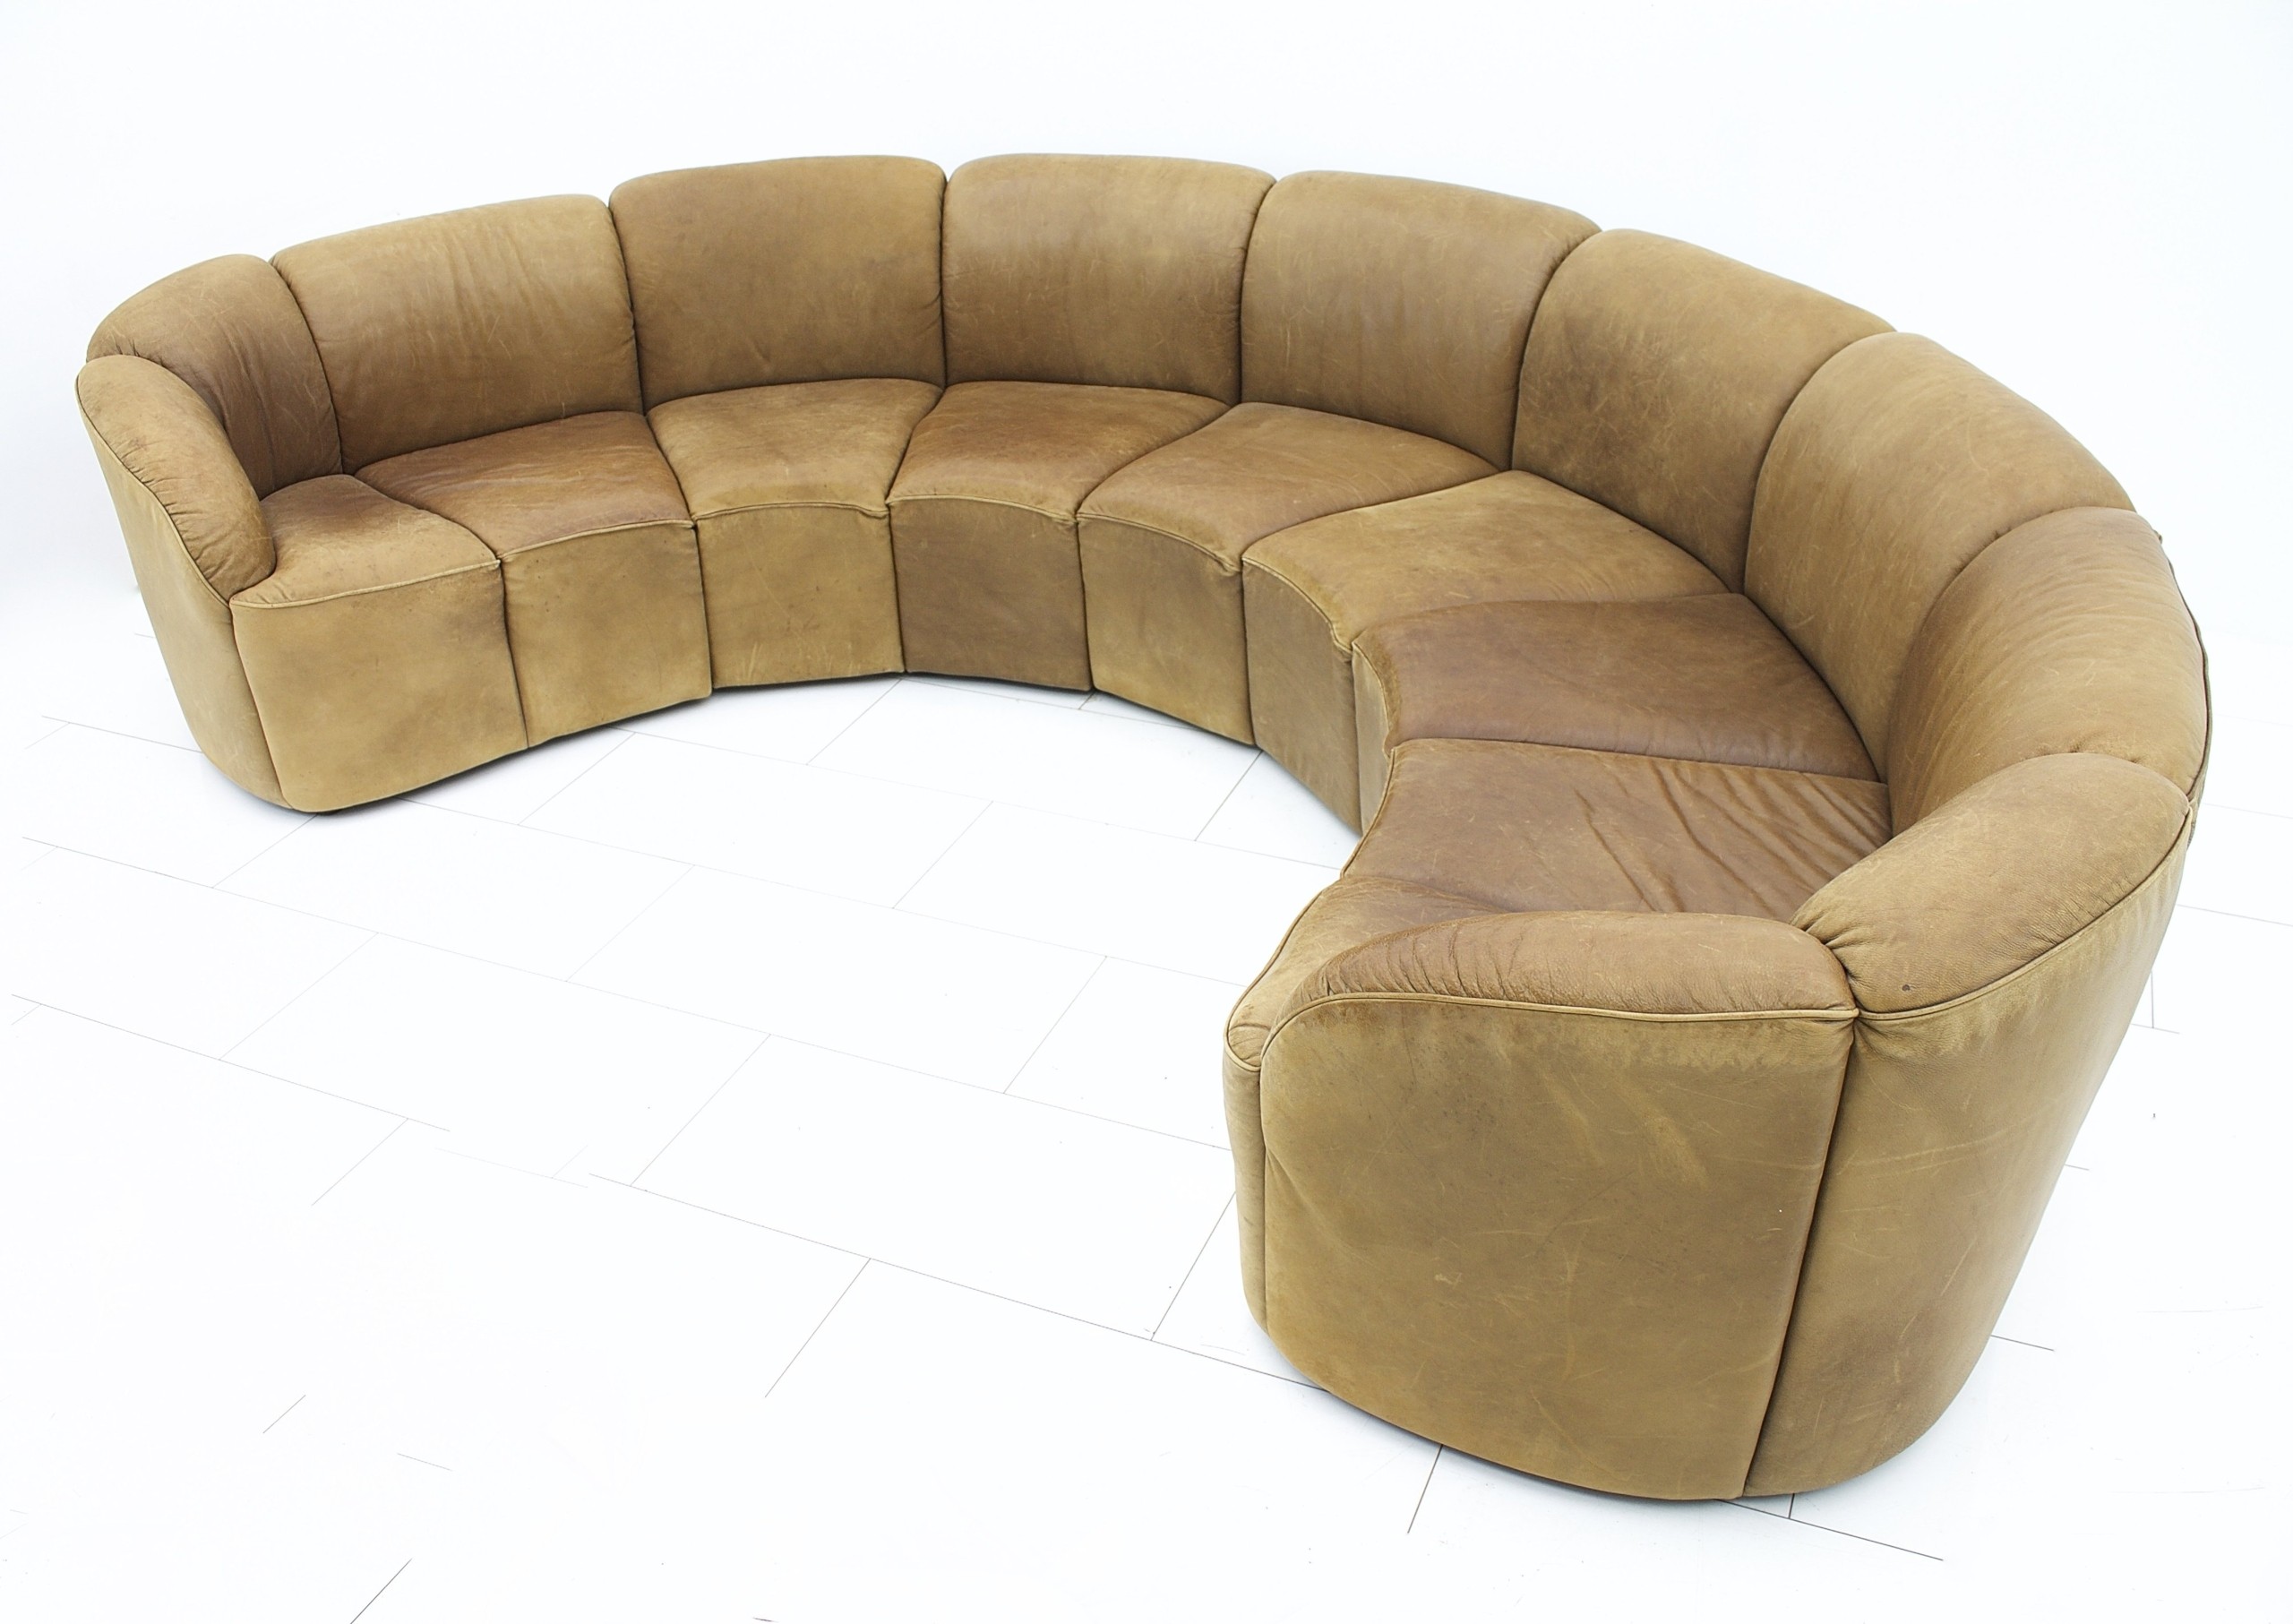 Half round leather sofa by walter knoll late 1960s 58022